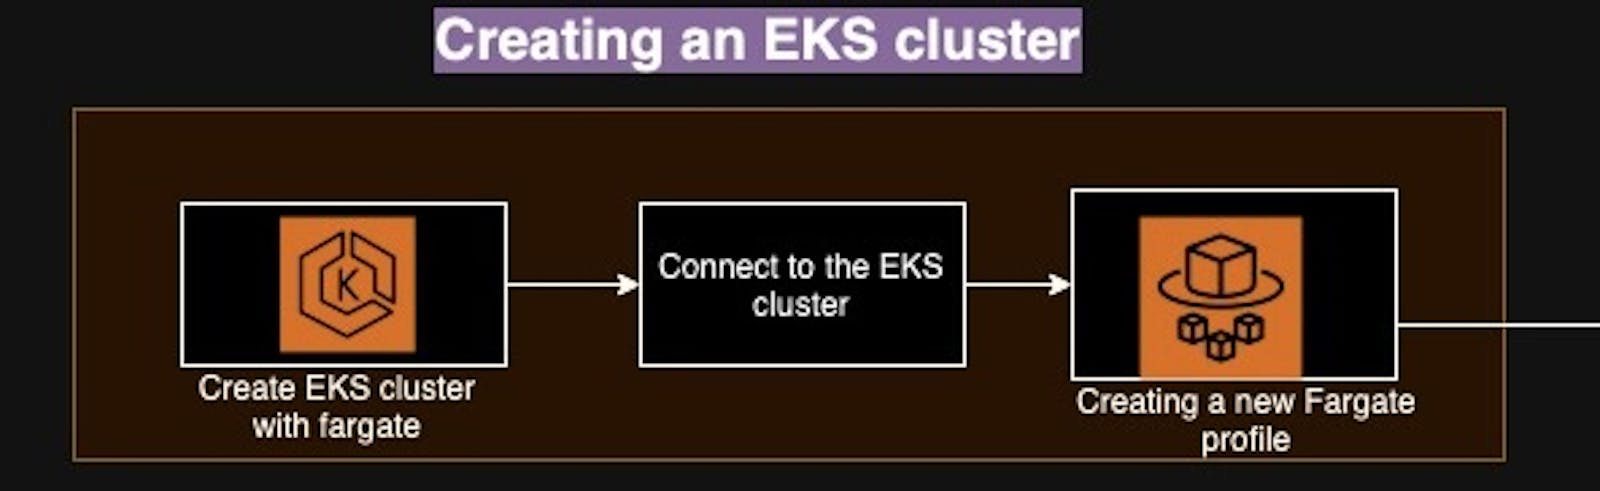 Part1: Deploying a gaming application on an EKS cluster with ingress controller